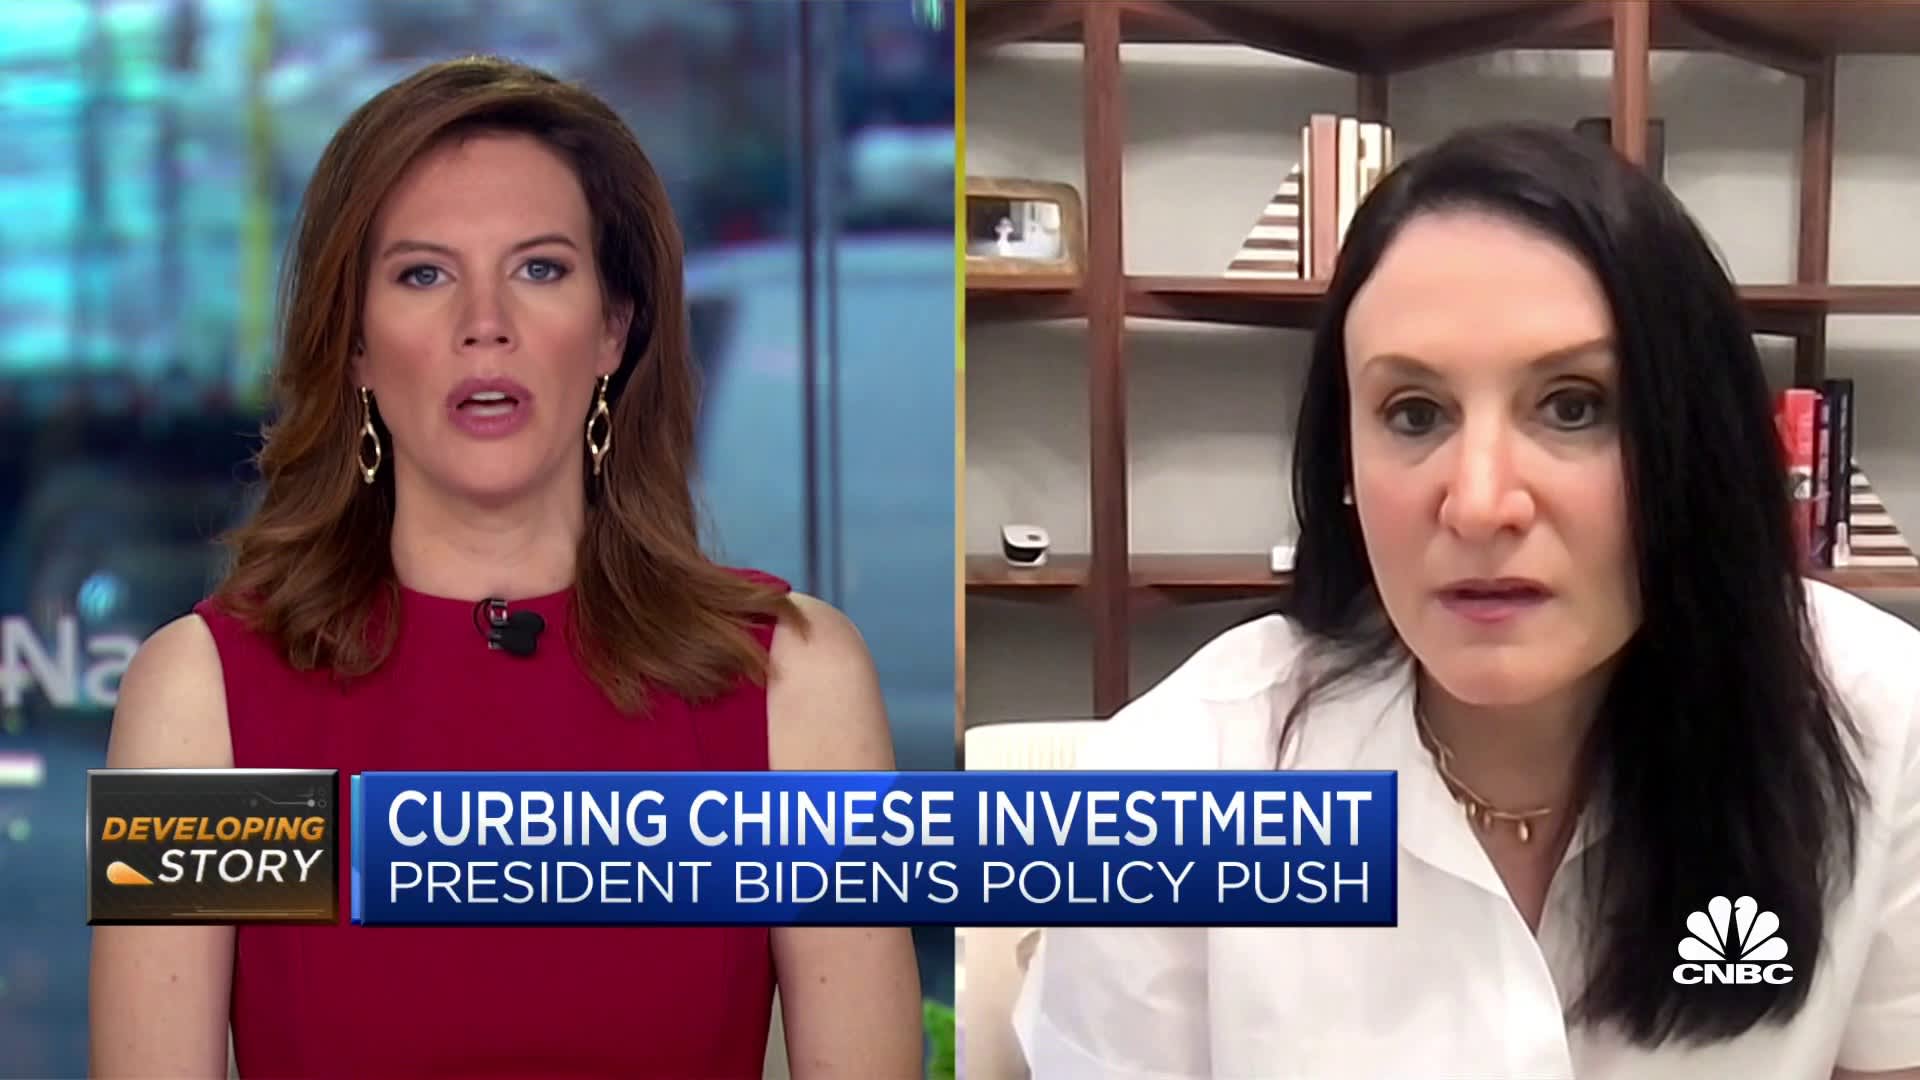 Biden's exec. order on China is much more narrow than originally conceived: Michelle Caruso-Cabrera